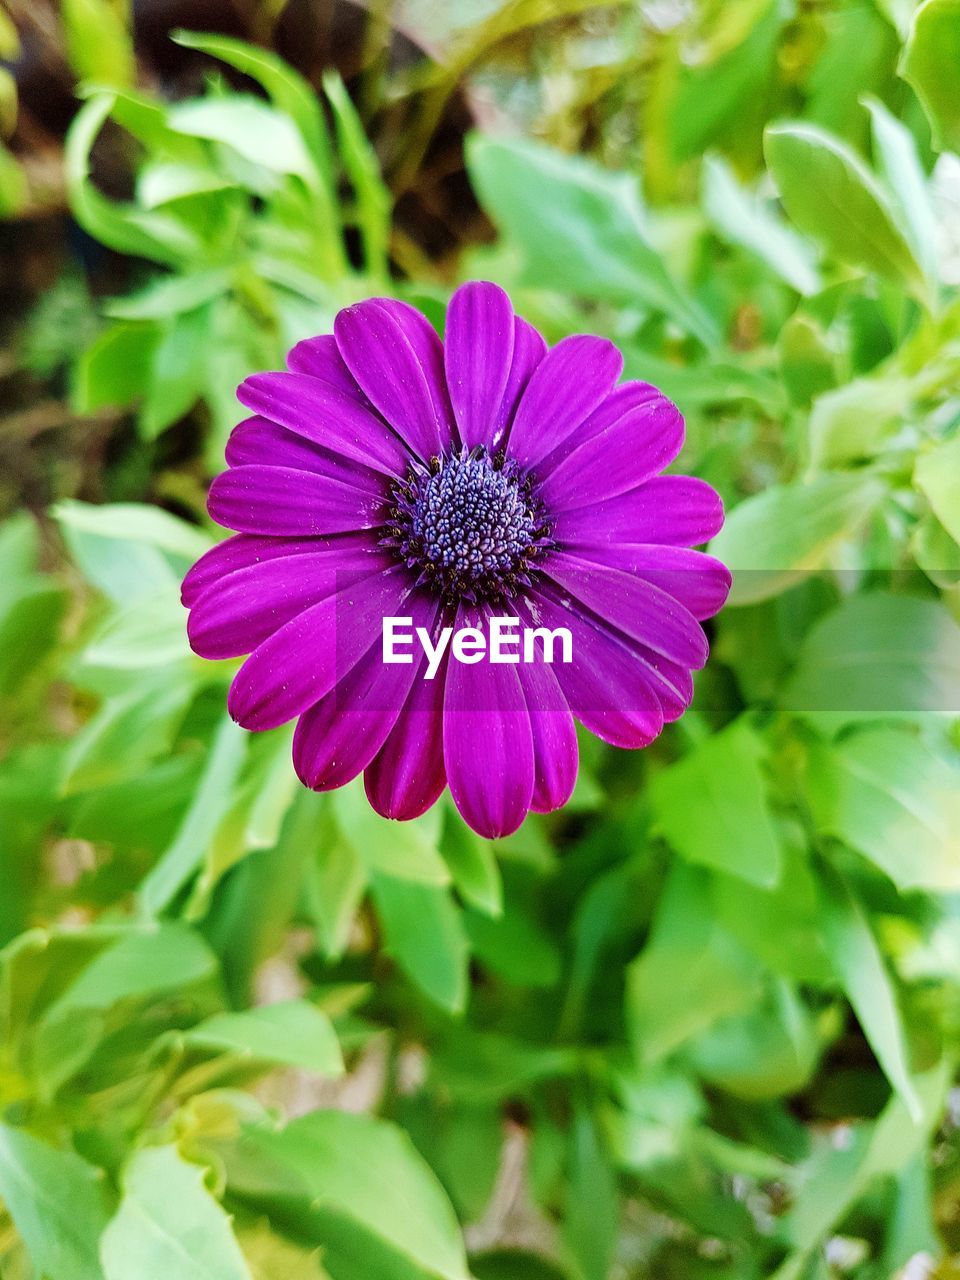 CLOSE-UP OF FRESH PURPLE FLOWER BLOOMING OUTDOORS